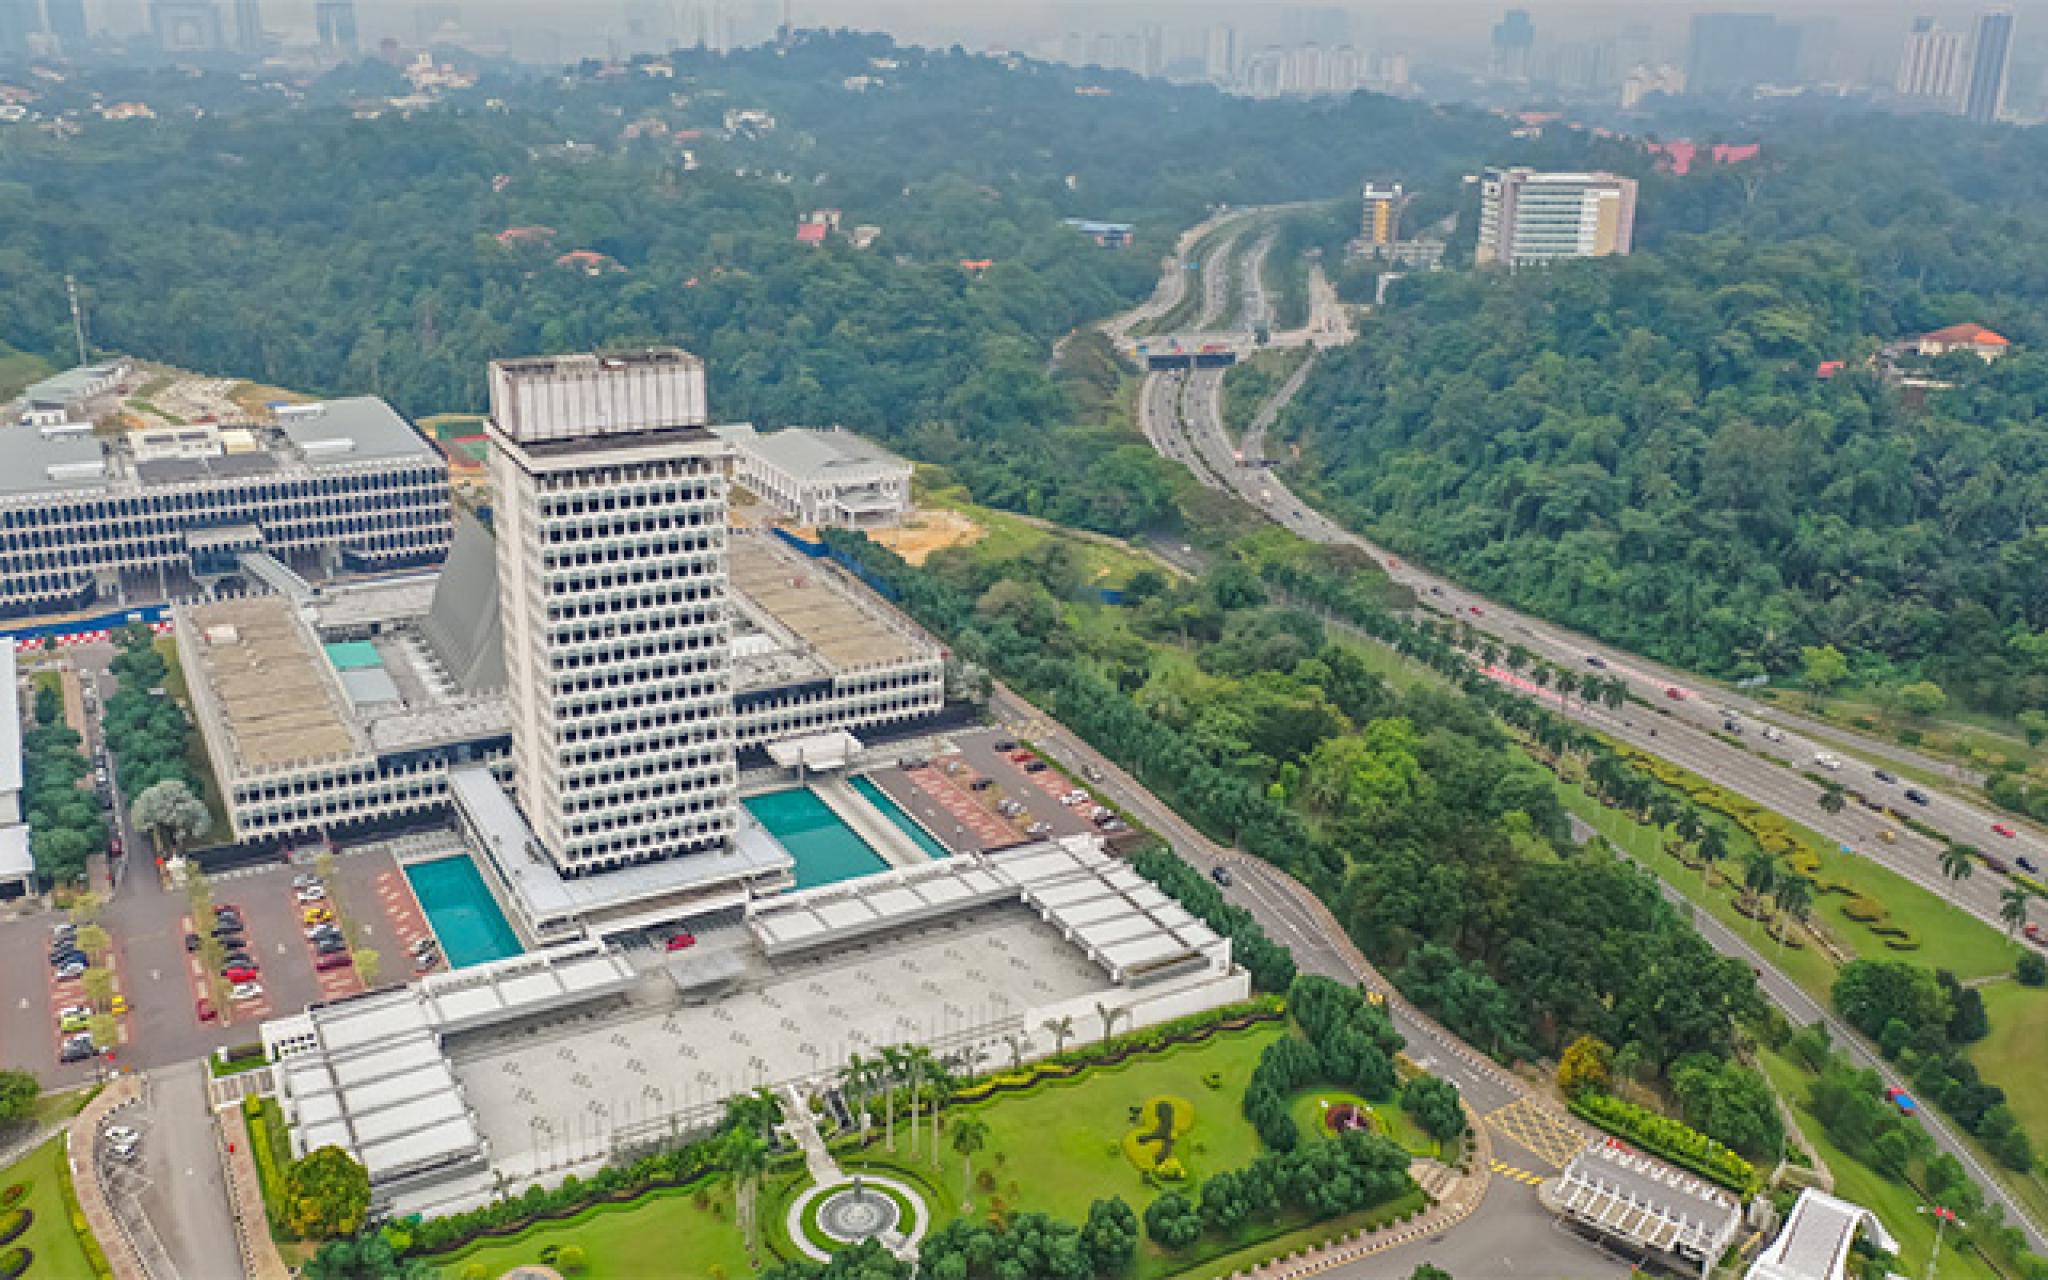 Malaysia Parliament Complex Aerial Photo With Streets View by Hasbul Aerial